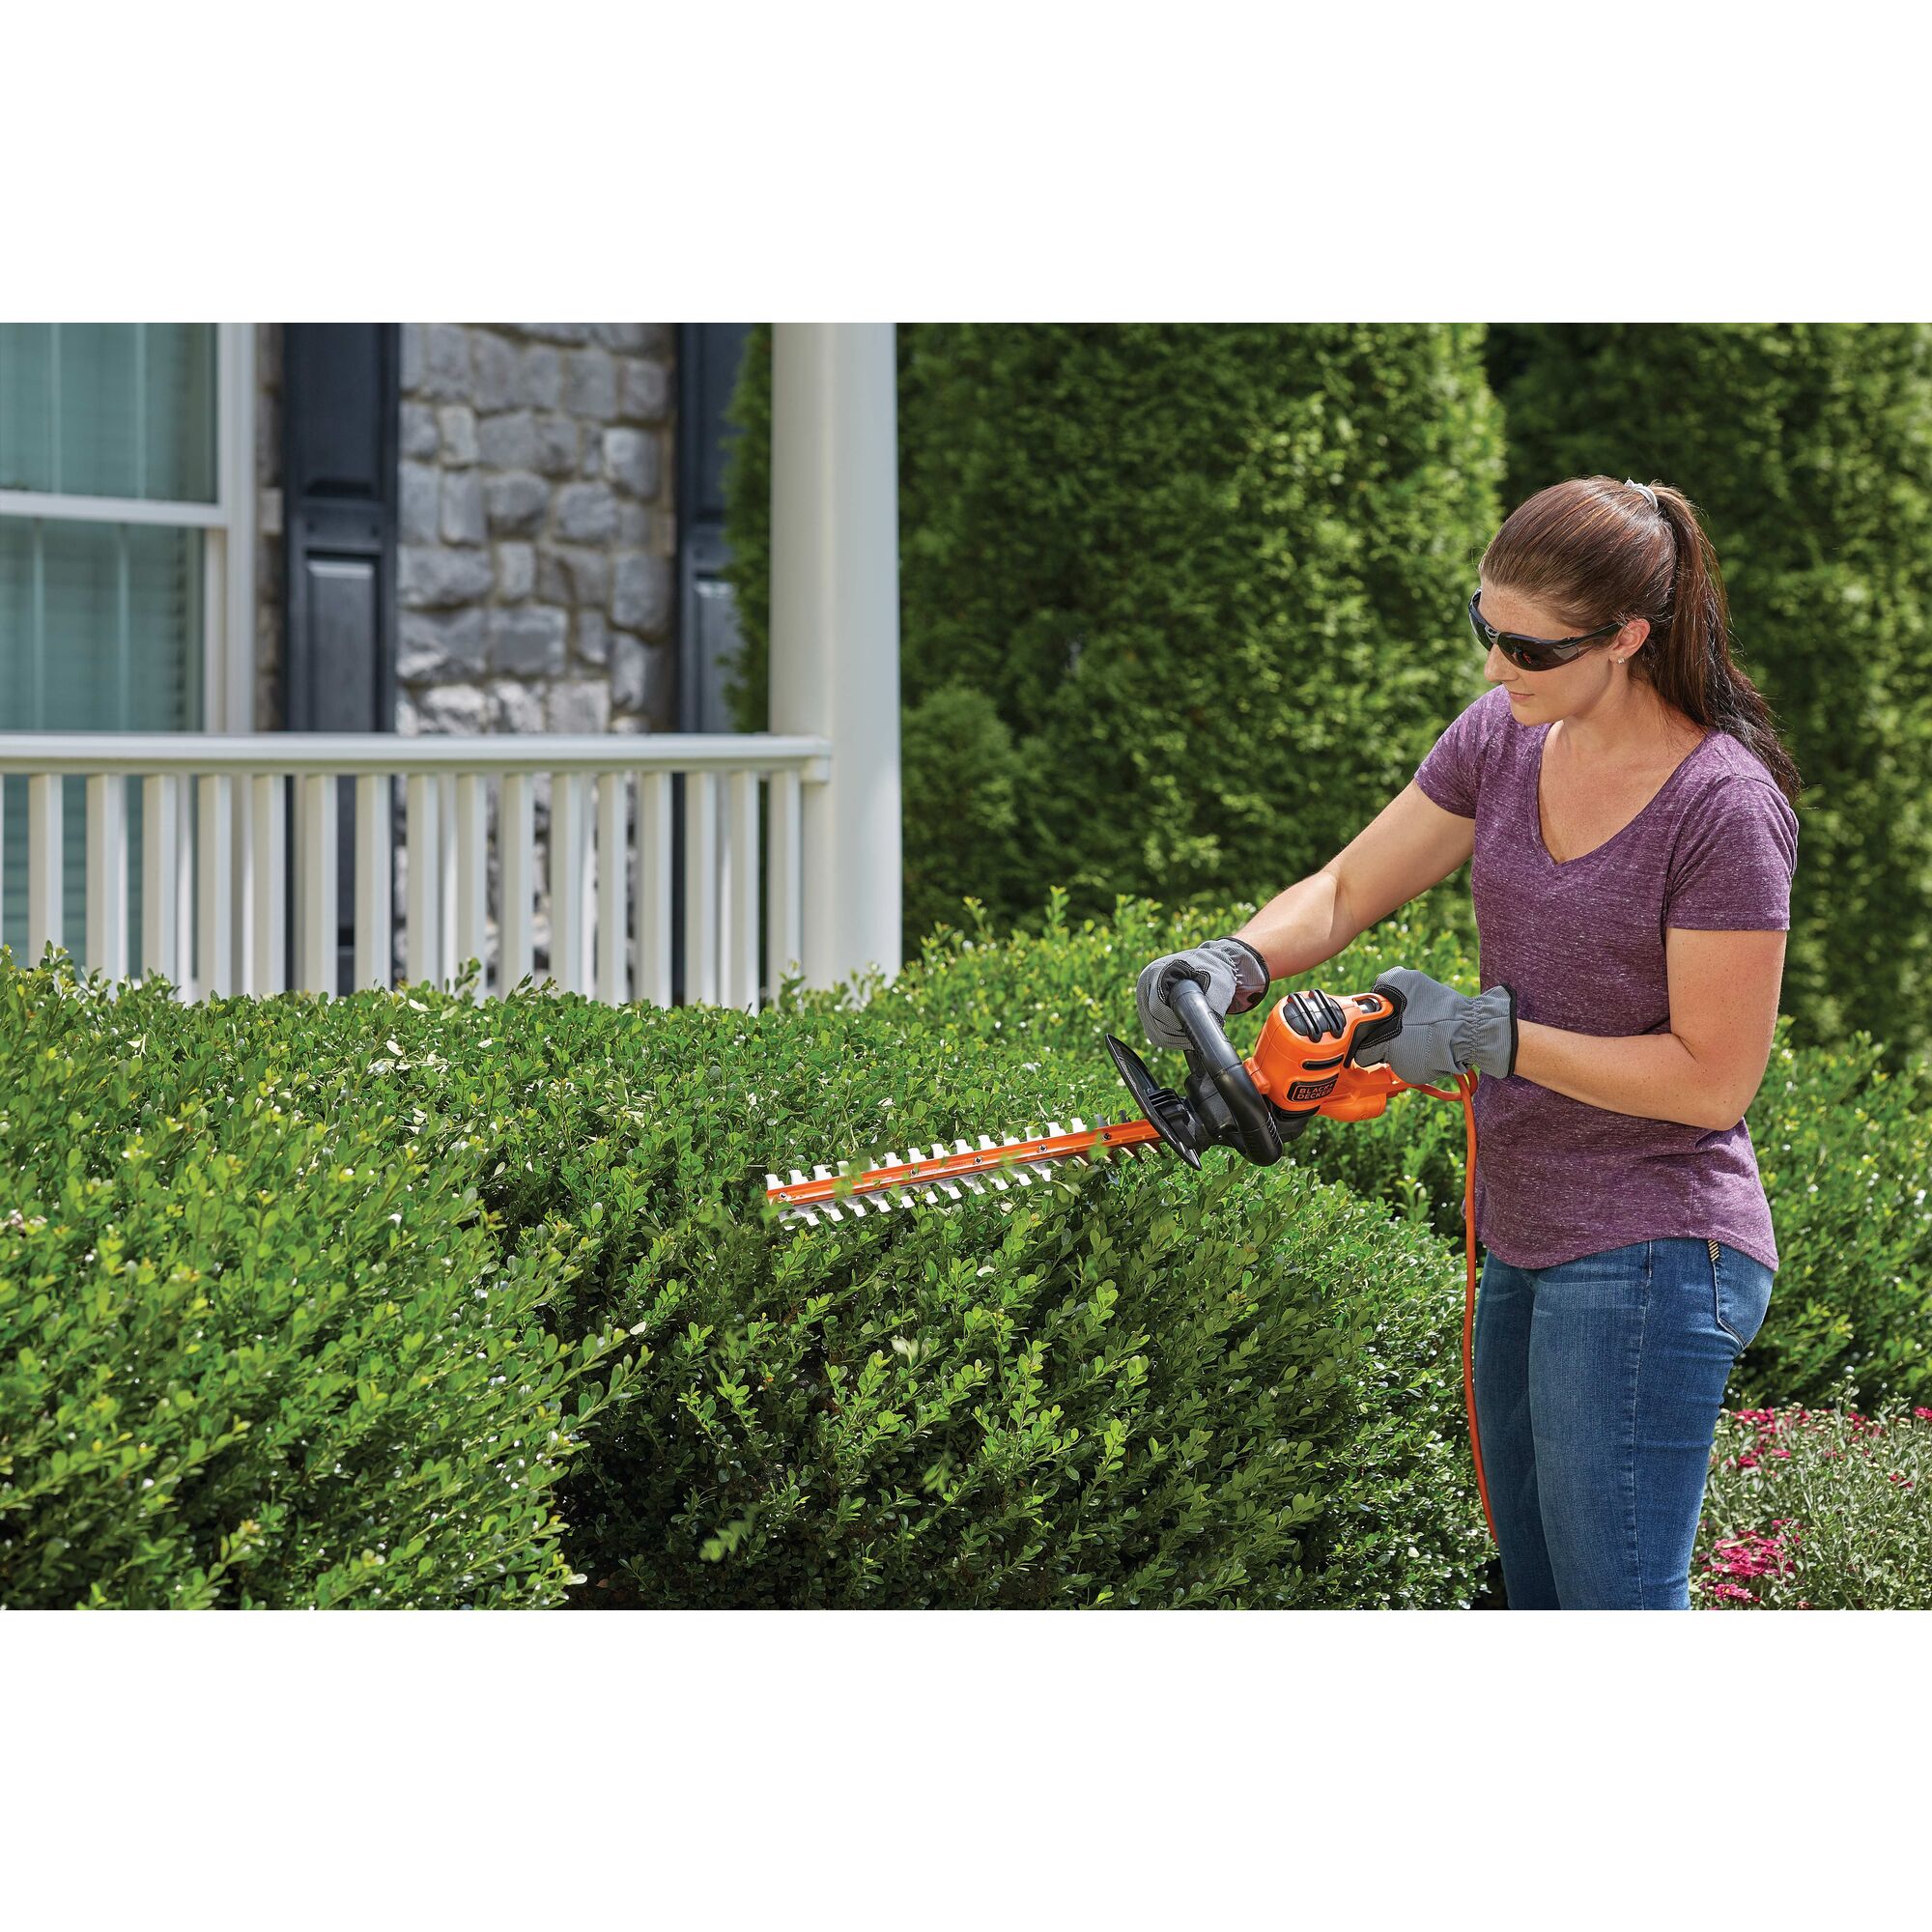 22 inch Electric Hedge Trimmer being used by person to trim bushes.